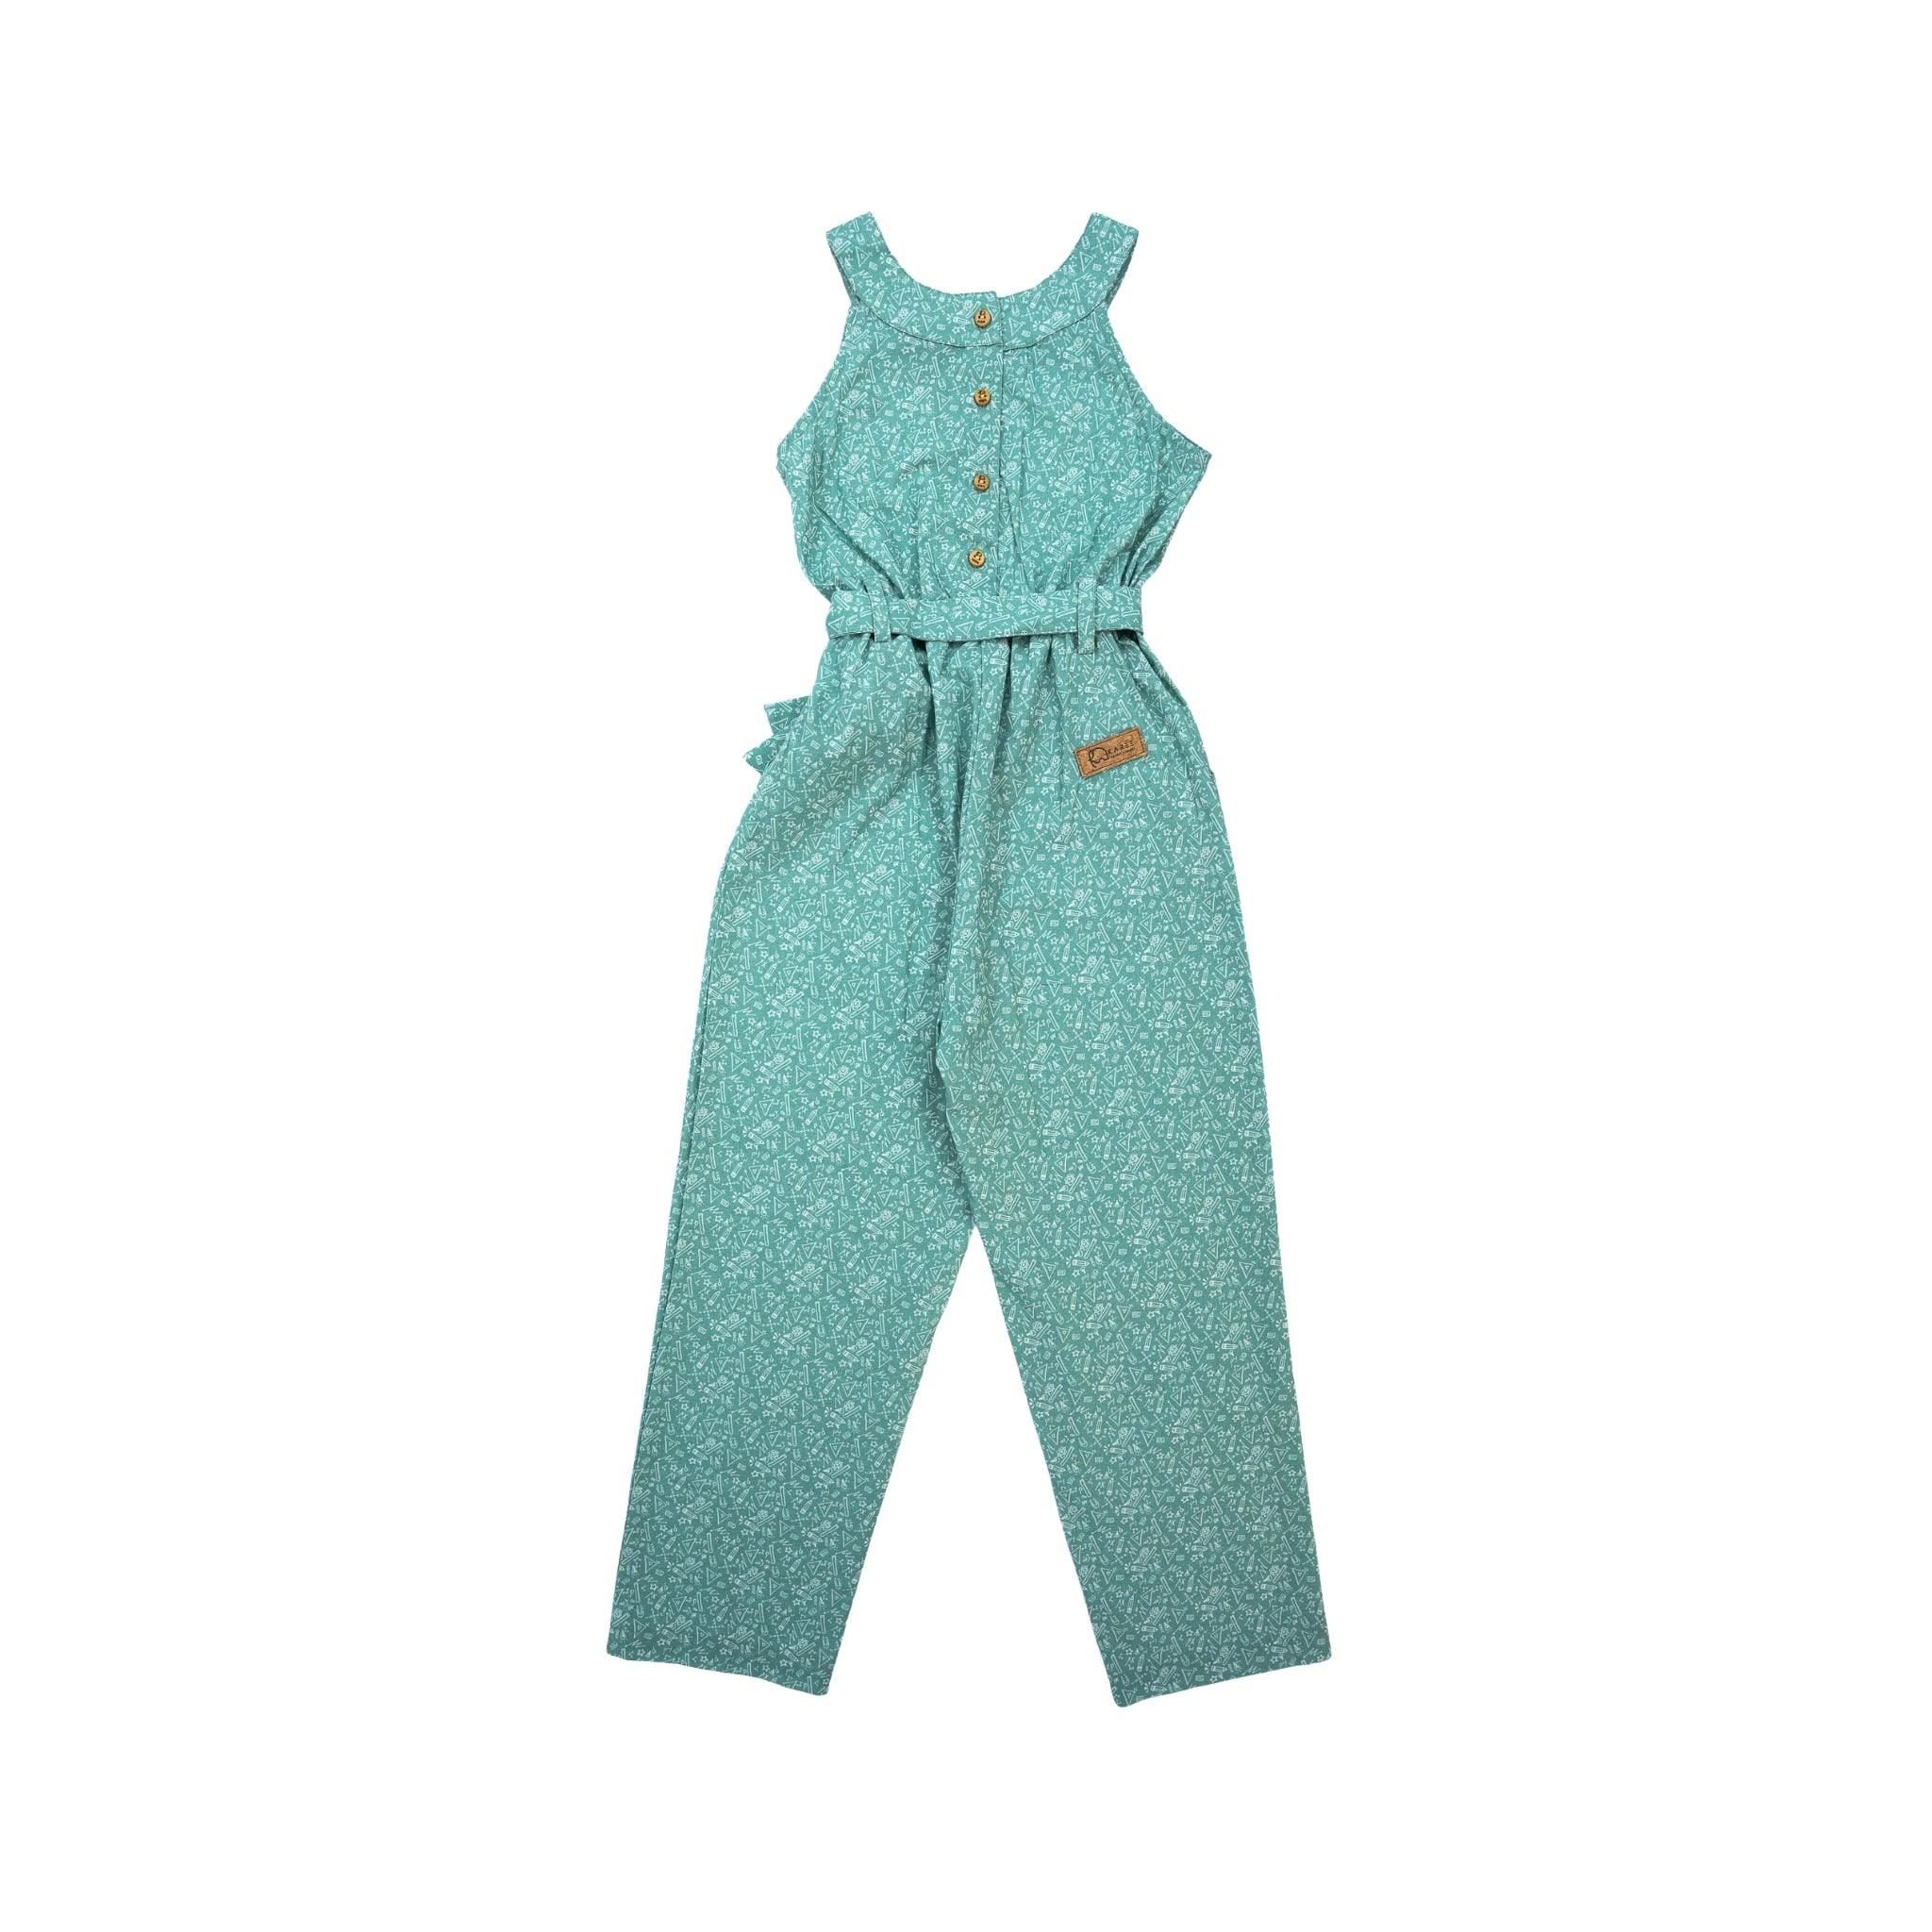 Sleeveless Karee smoke green cotton jumpsuit for girls with small floral pattern, featuring front buttons and a cinched waist with a tie belt.